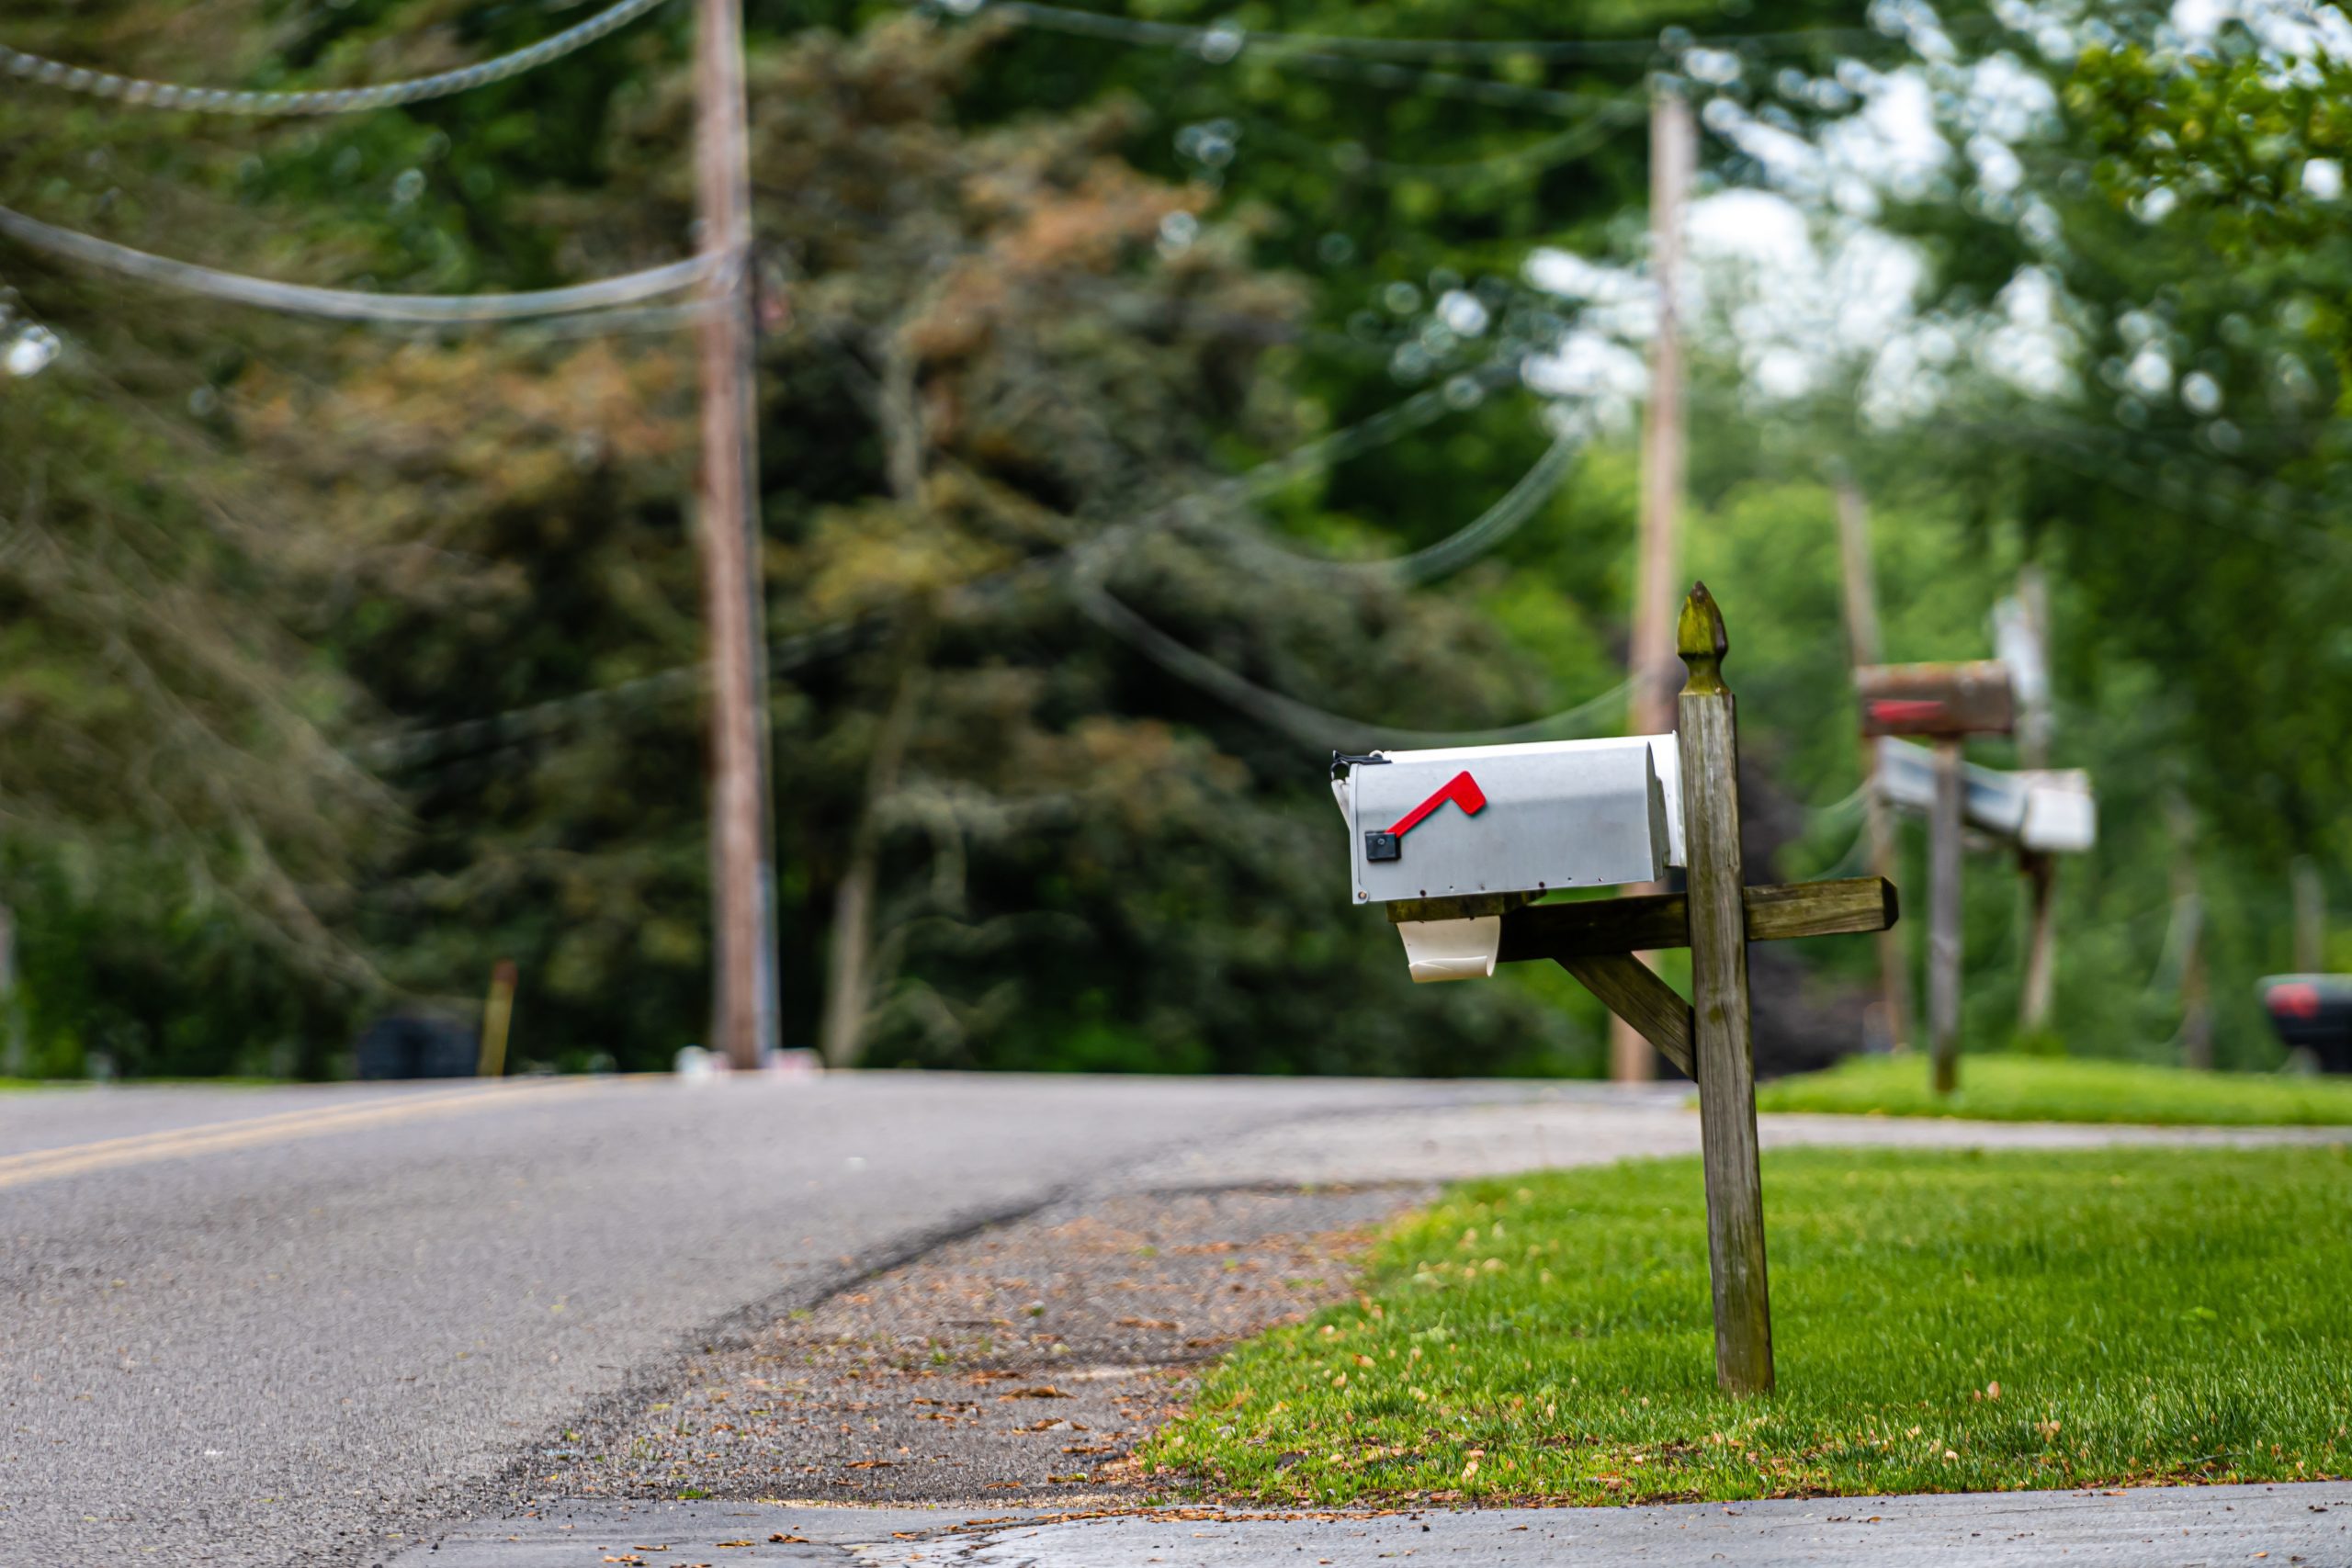 A mailbox sits at the end of a laneway by the road